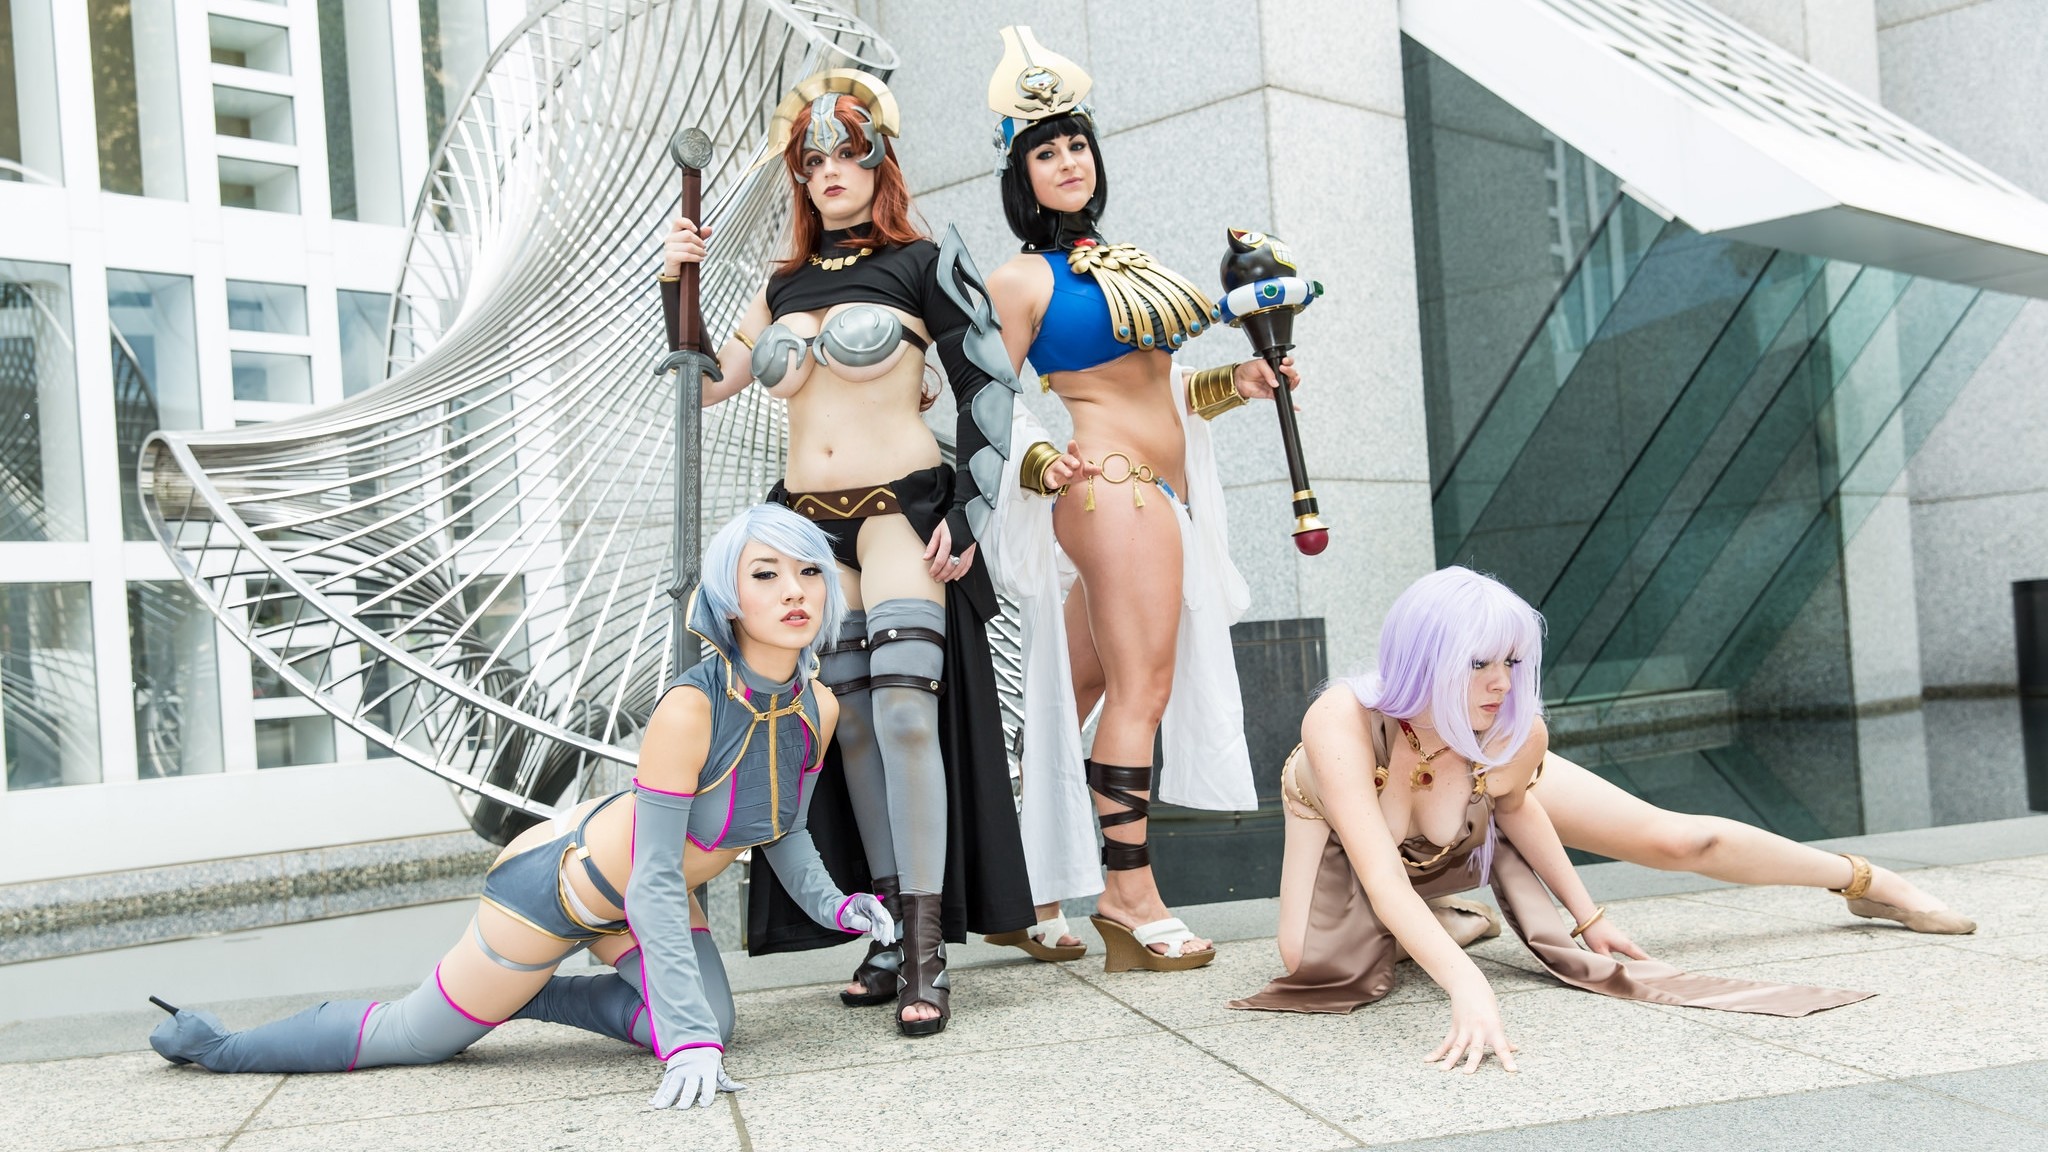 2048x1152 Wallpaper of Irma, Claudette, Menace & Annelotte cosplay from Queen's Blade